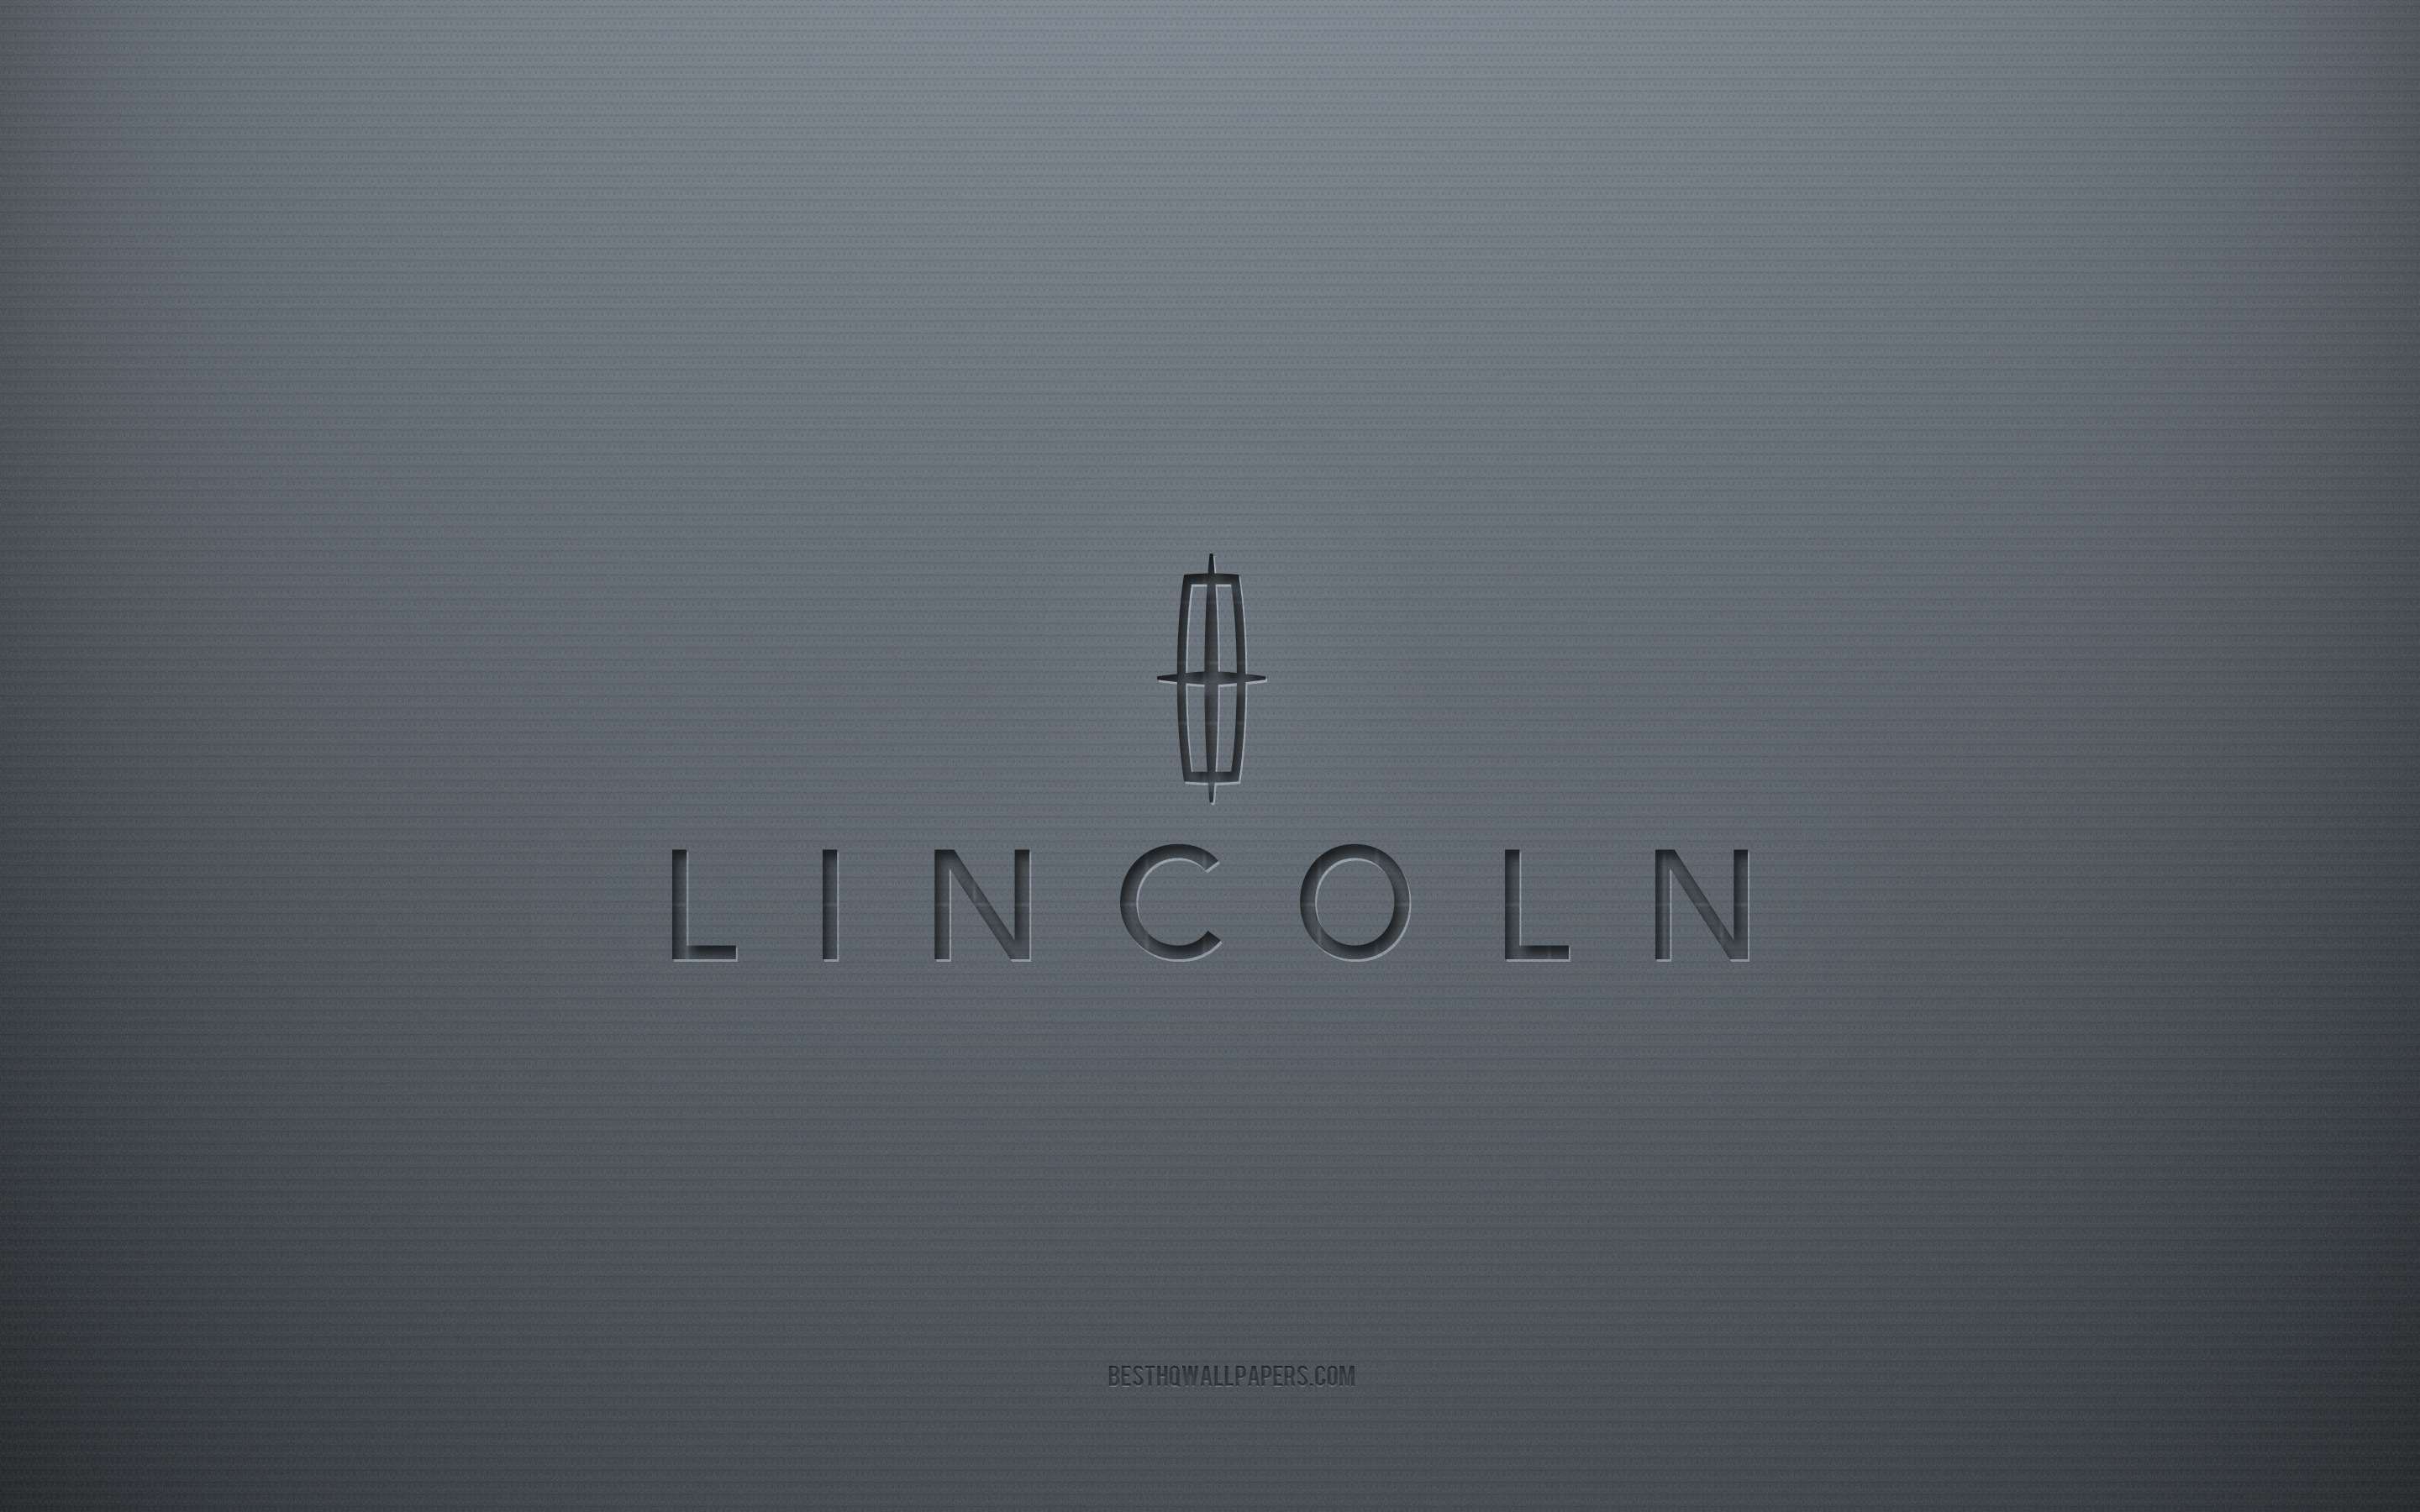 Download wallpaper Lincoln logo, gray creative background, Lincoln emblem, gray paper texture, Lincoln, gray background, Lincoln 3D logo for desktop with resolution 2880x1800. High Quality HD picture wallpaper